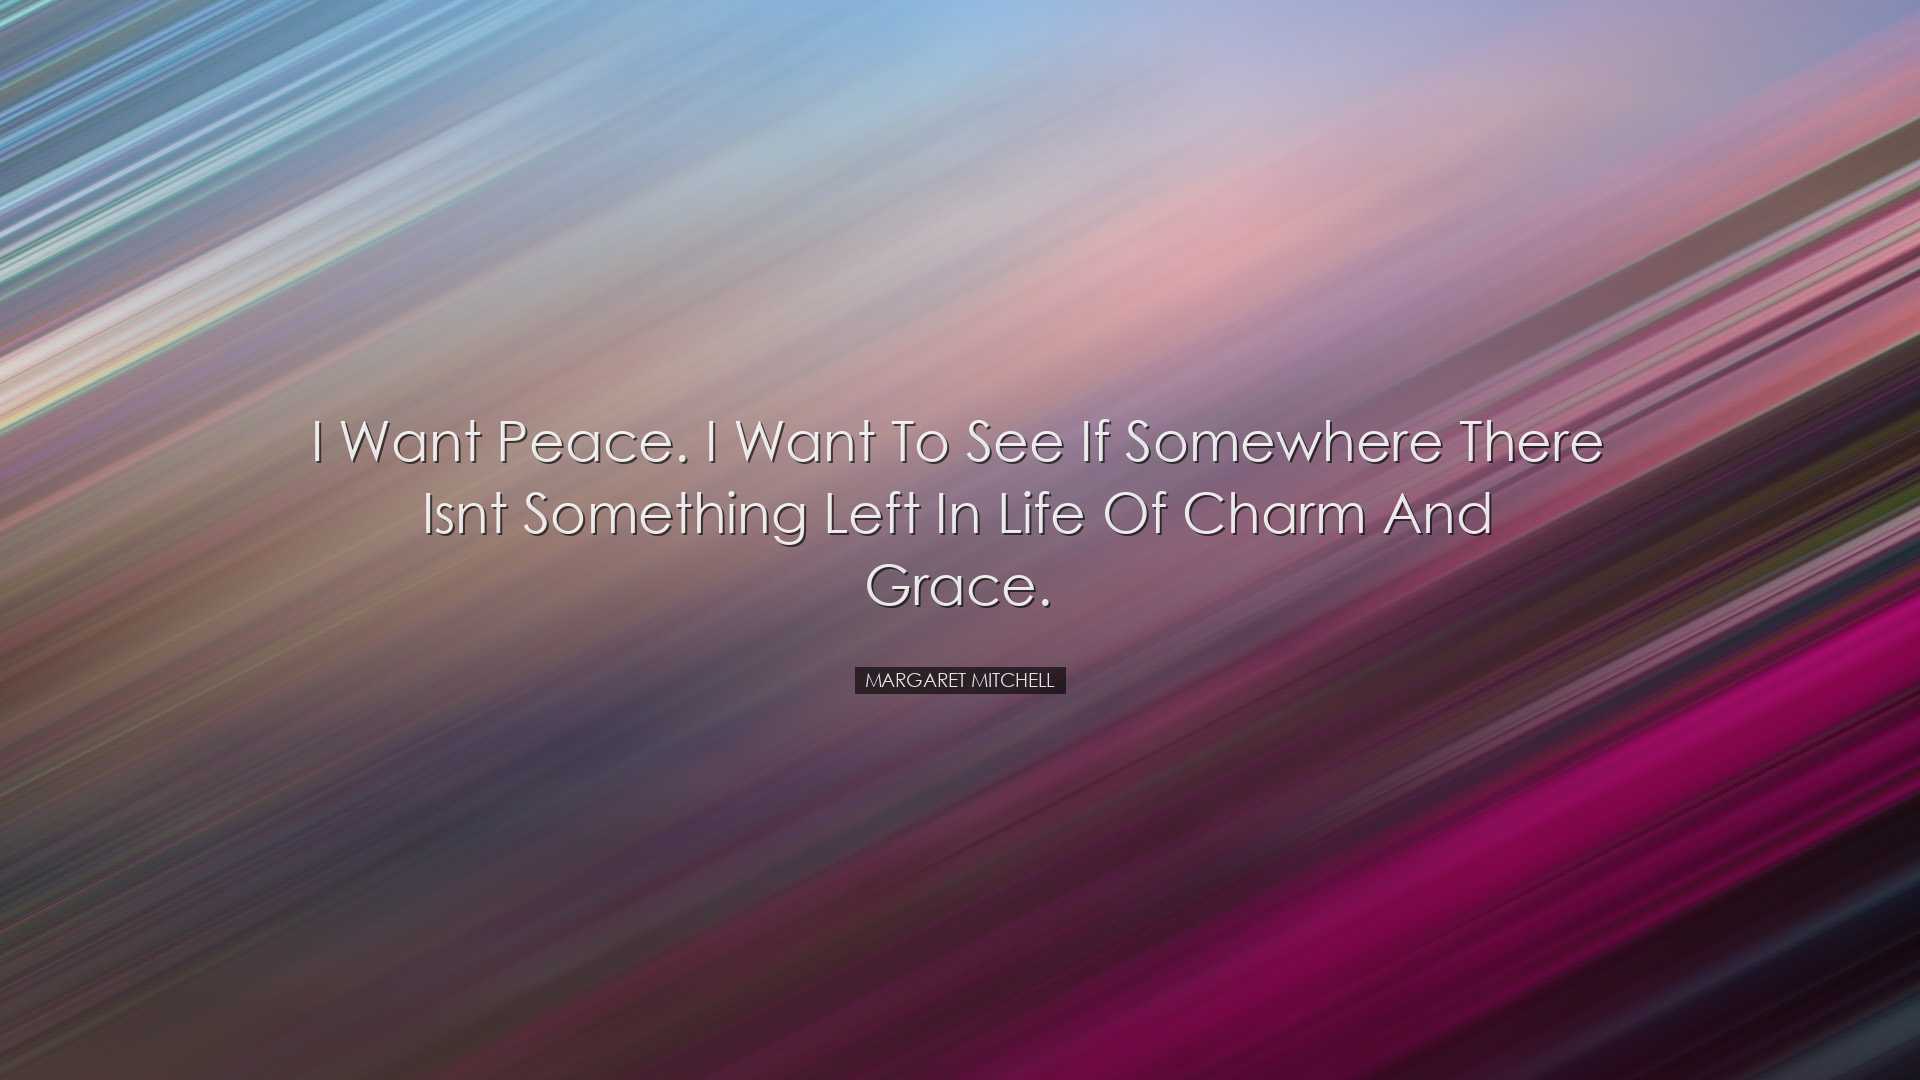 I want peace. I want to see if somewhere there isnt something left